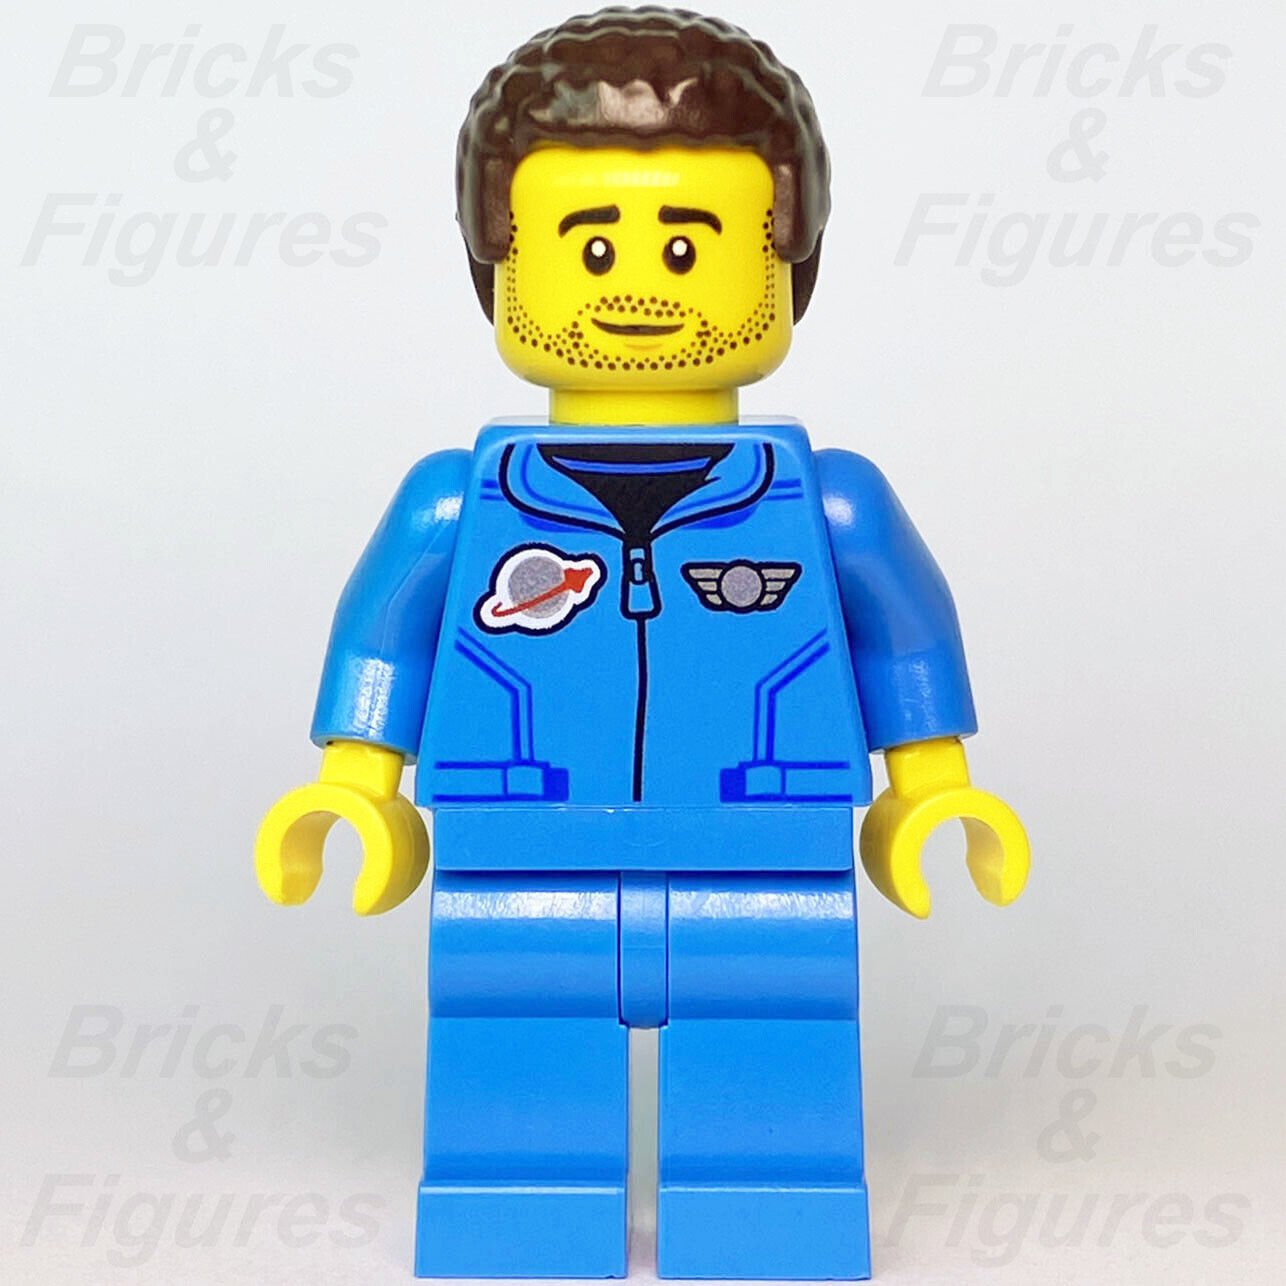 Town LEGO Lunar Research Astronaut Male Space Port Minifigure 60350 cty1412 New - Bricks & Figures